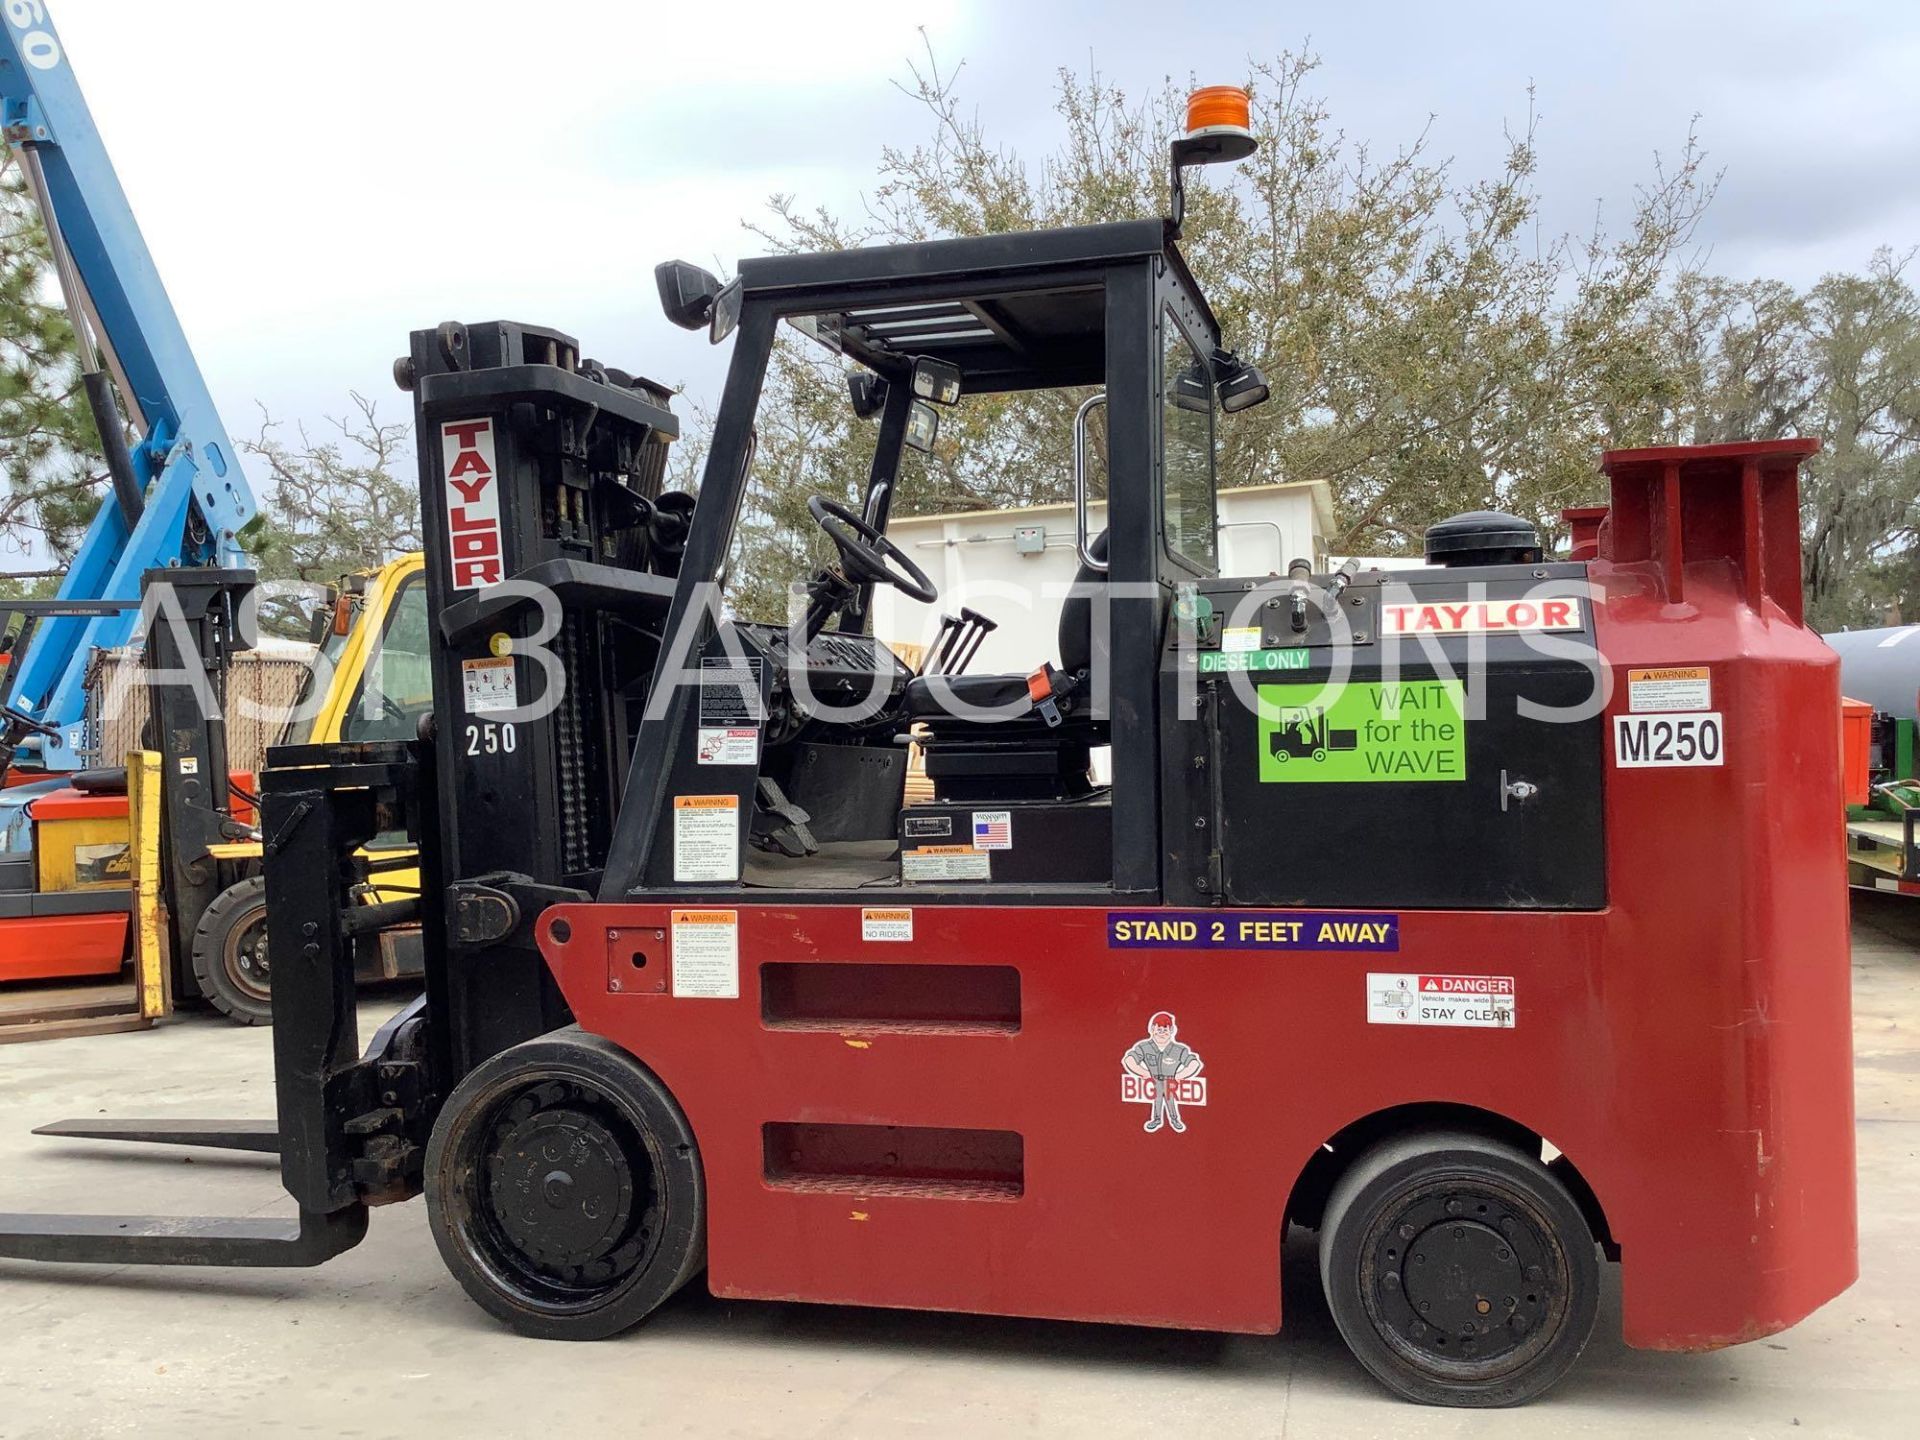 TAYLOR "BIG RED" DIESEL FORKLIFT MODEL TC250, FACTORY RECONDITIONED IN 2014